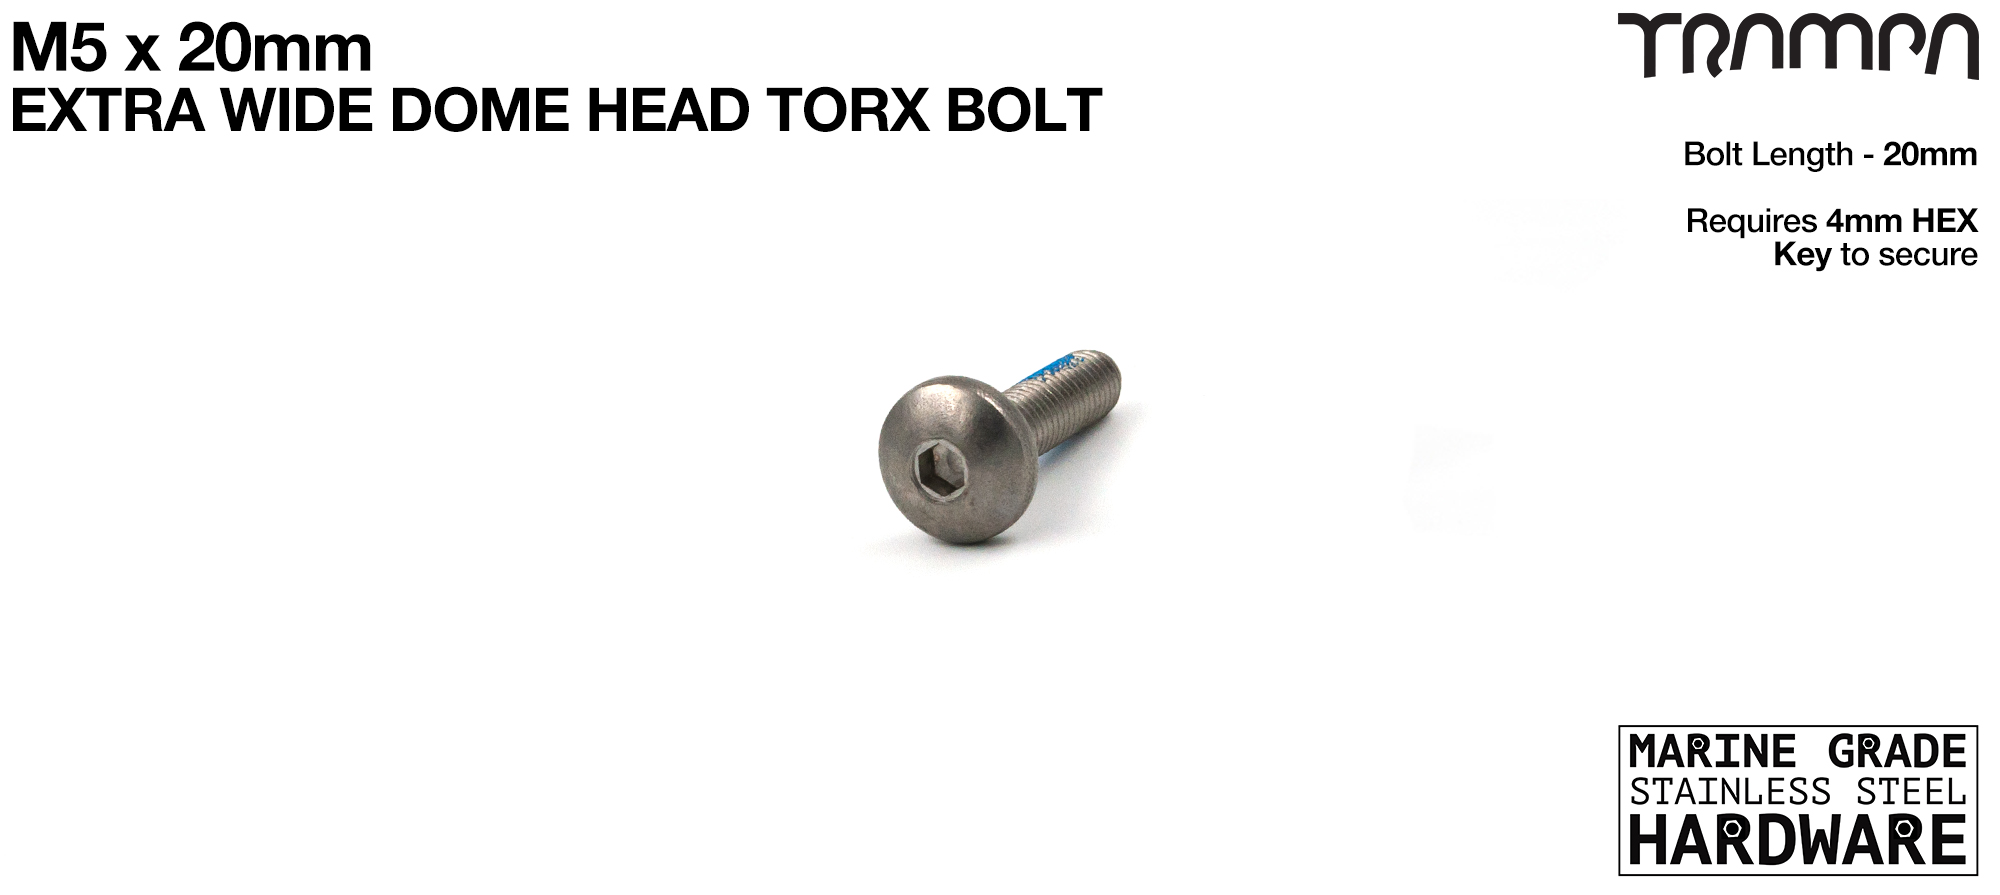 M5 x 20mm EXTRA WIDE Dome head Allen-Key Bolt - Marine Grade Stainless steel with locking paste